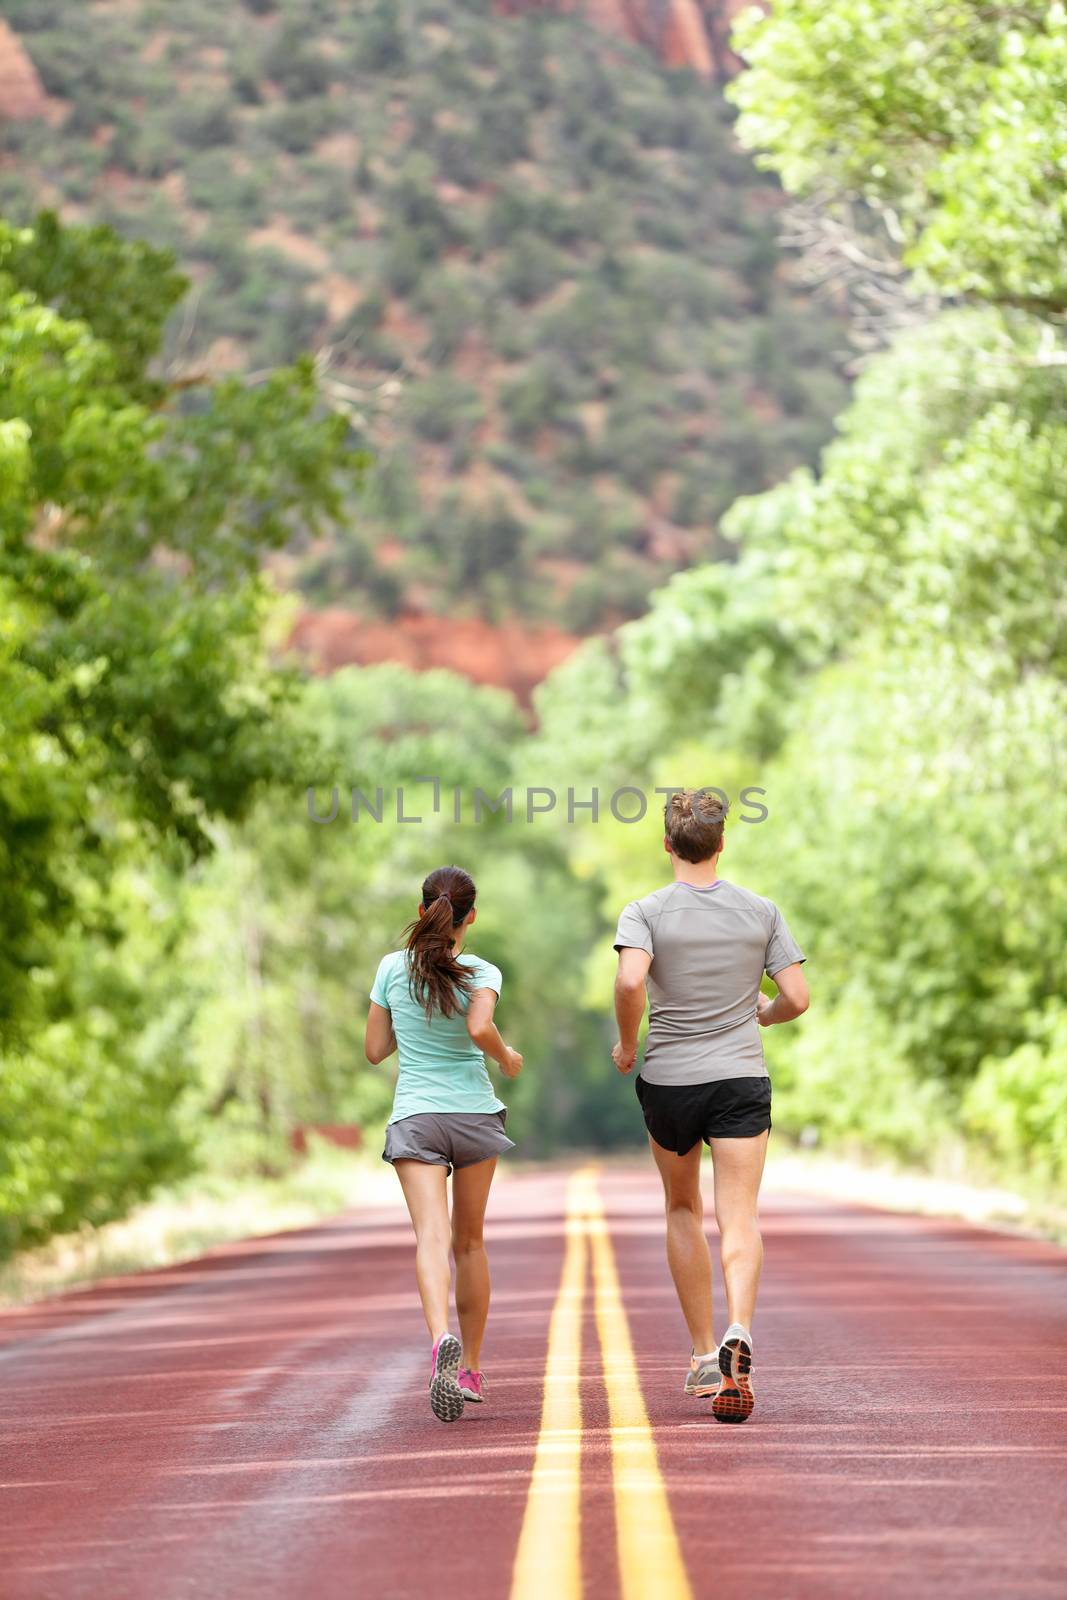 Runners running on road in nature away from camera by Maridav